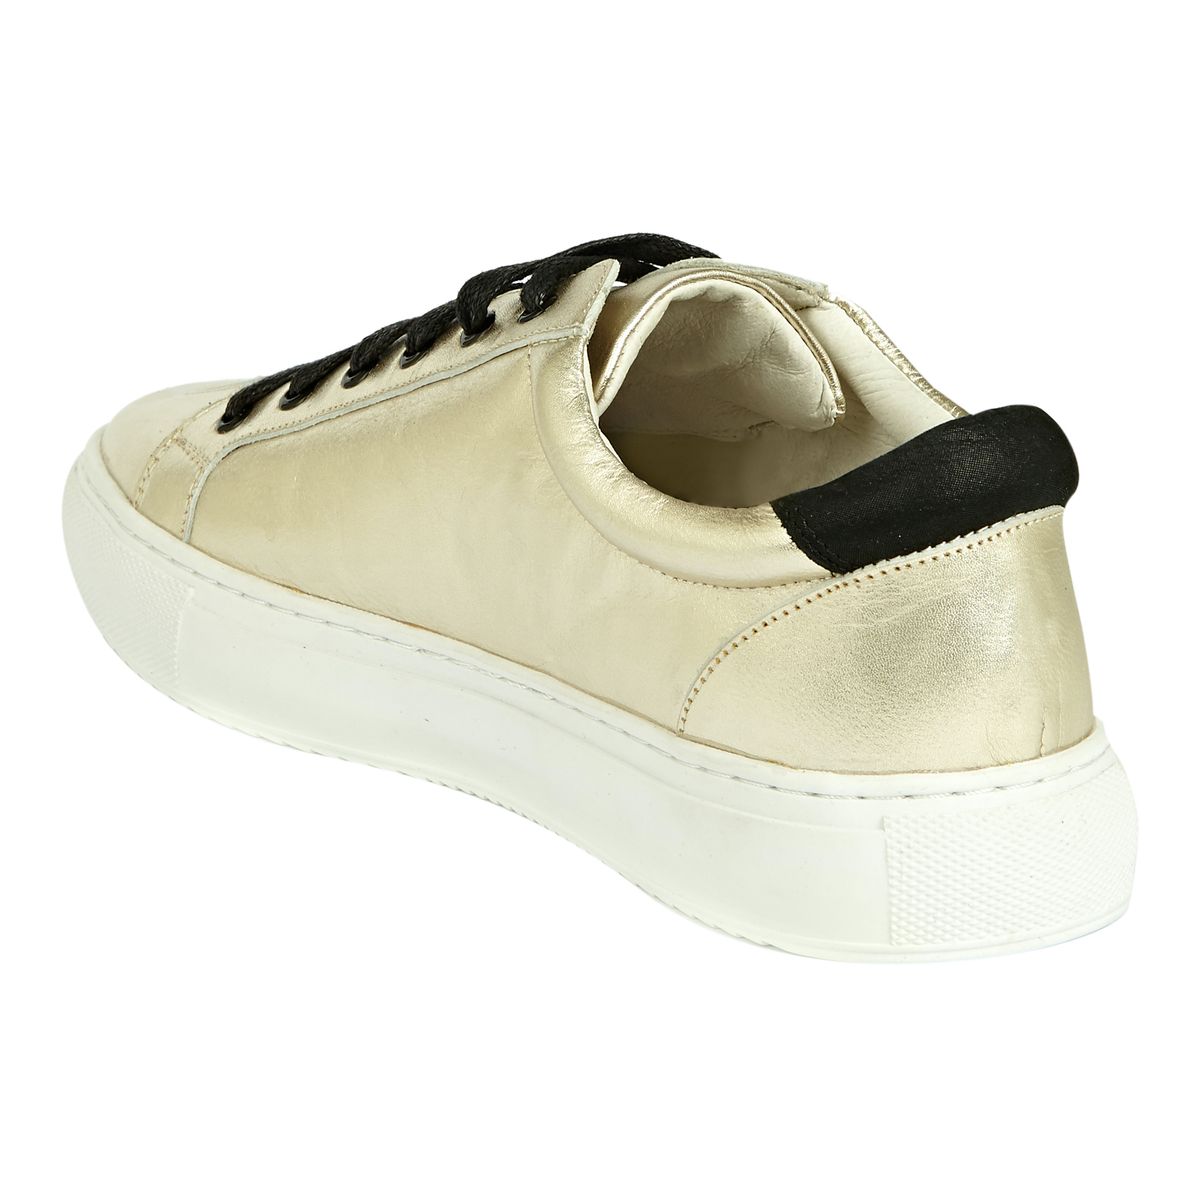 Cocorose London Hoxton Gold with Black Stars comfort trainers